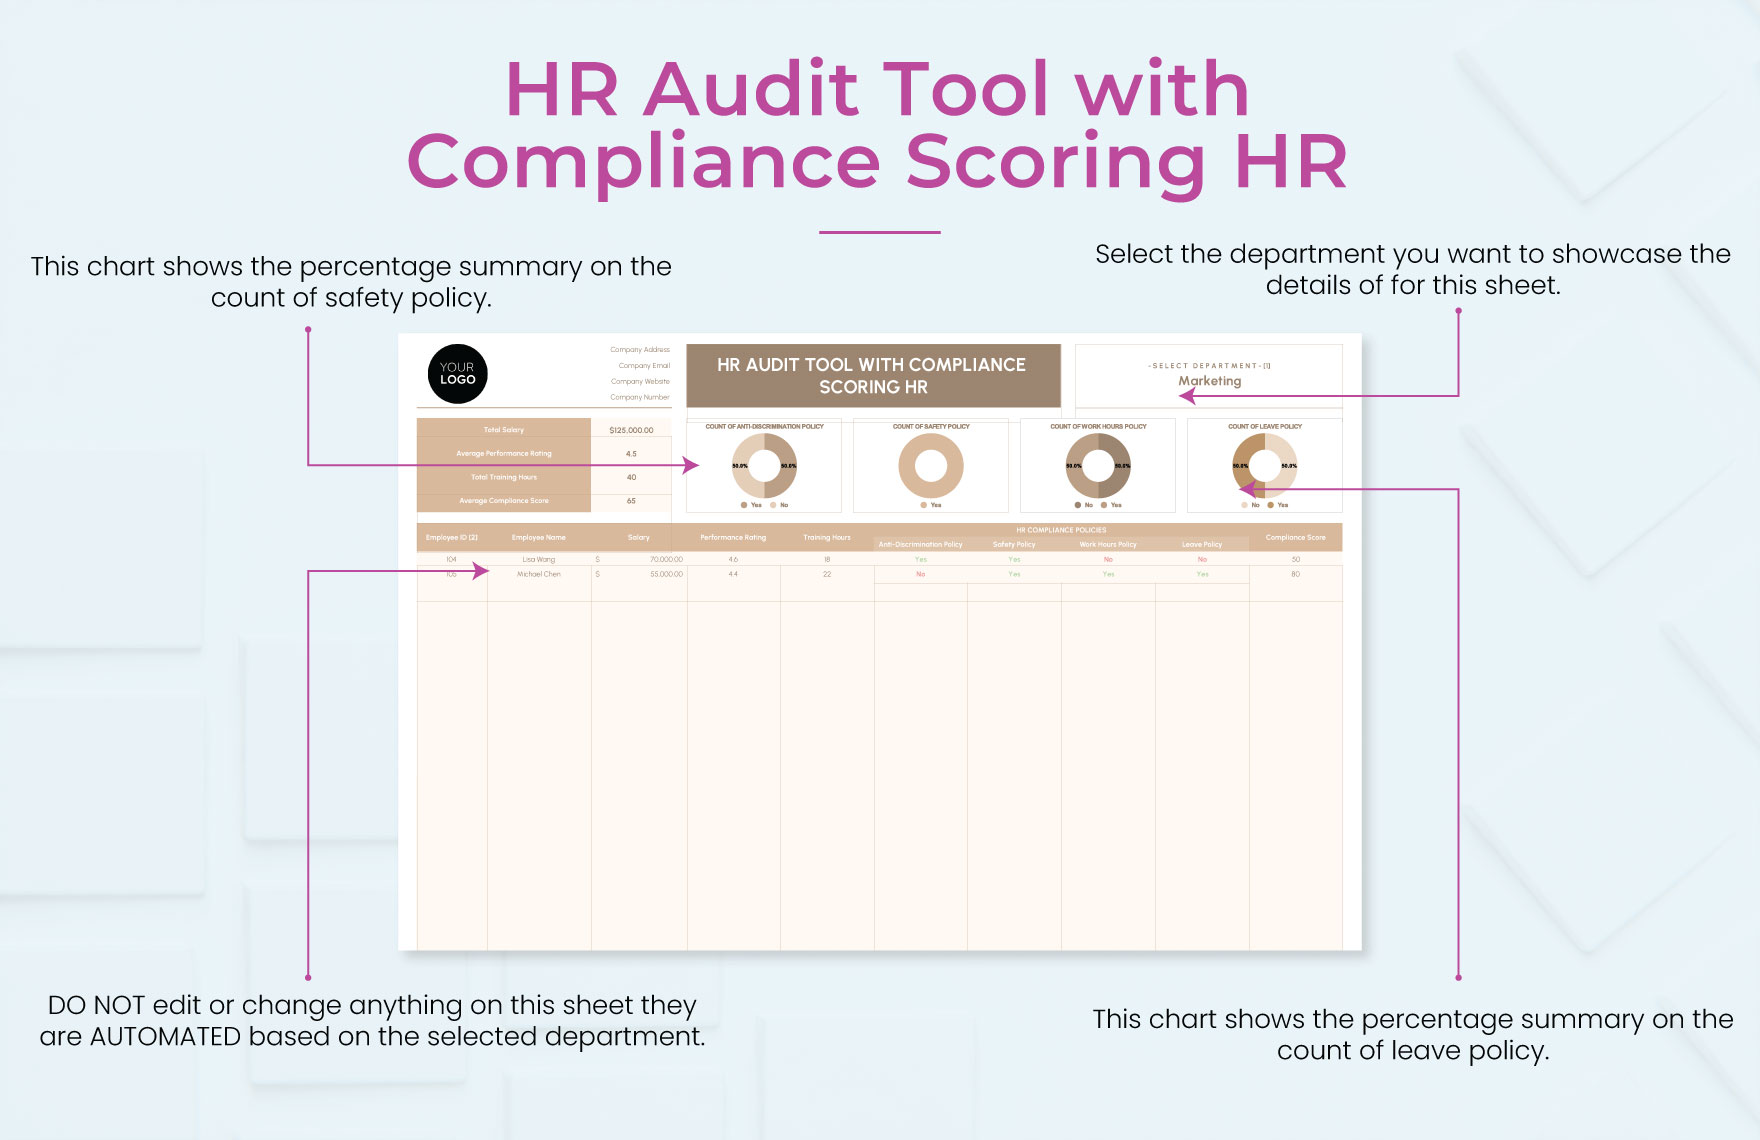 HR Audit Tool with Compliance Scoring HR Template